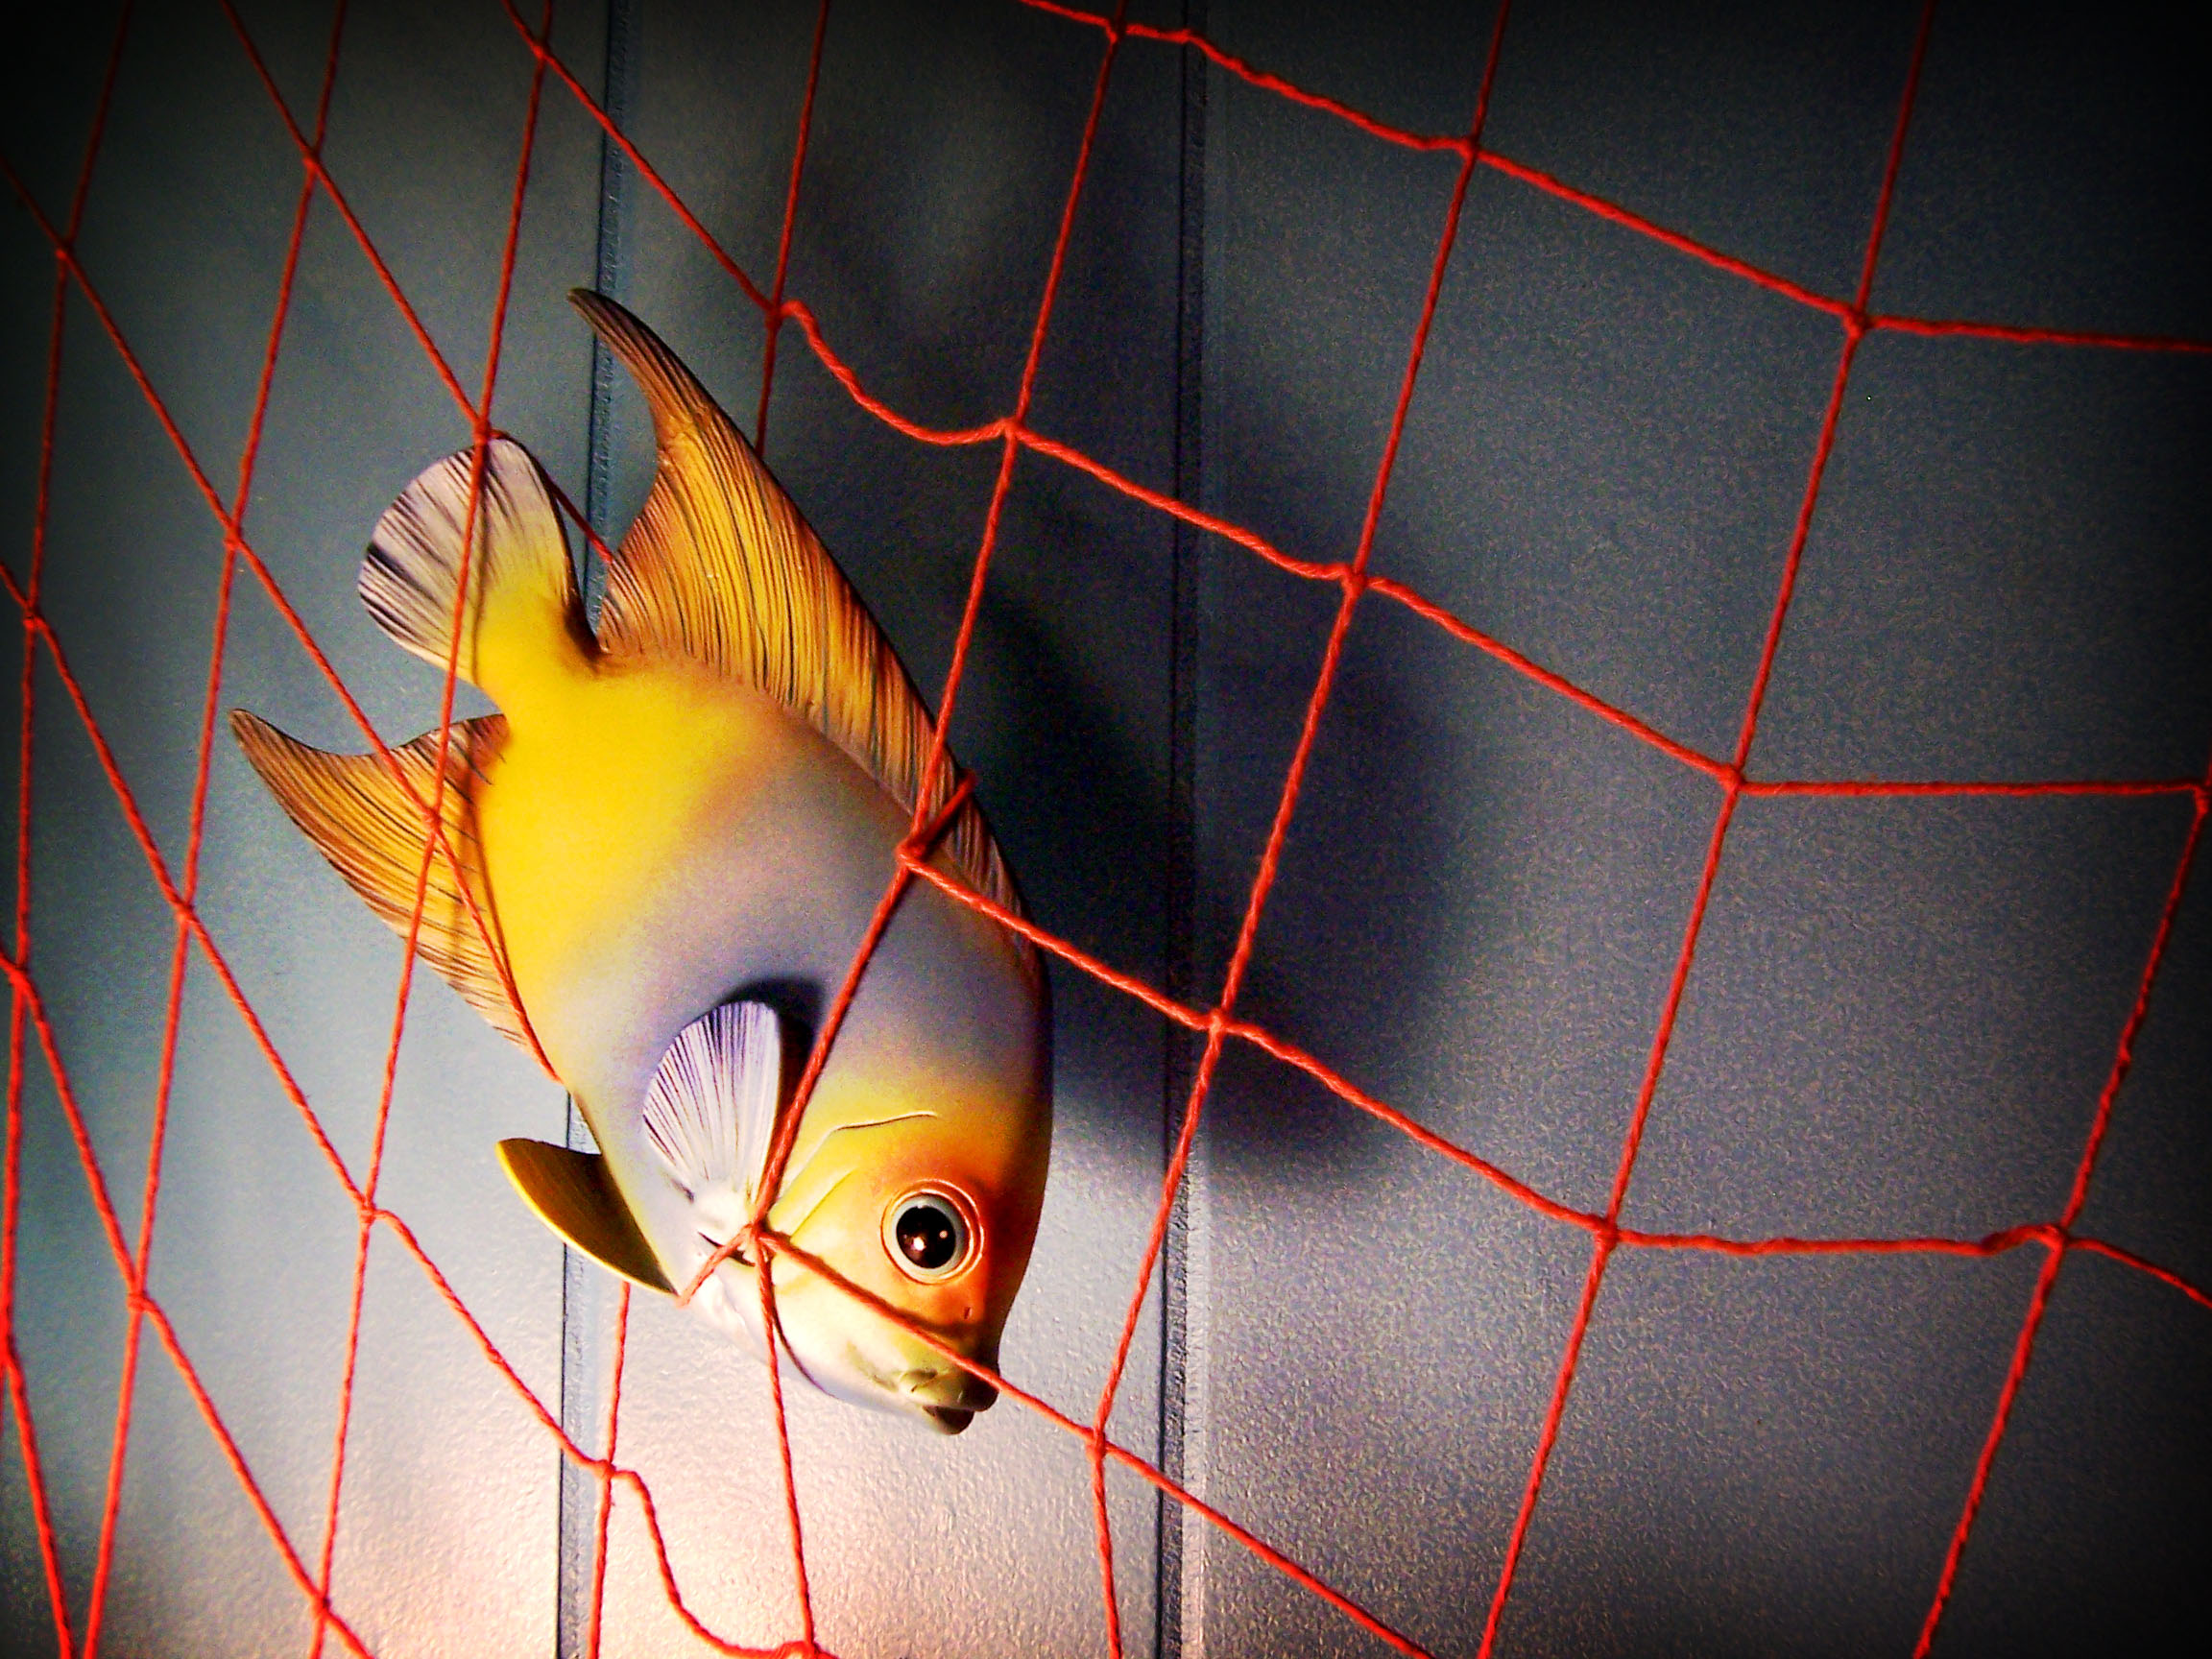 A yellow plastic fish caught in a net hangs against a grey cubicle wall